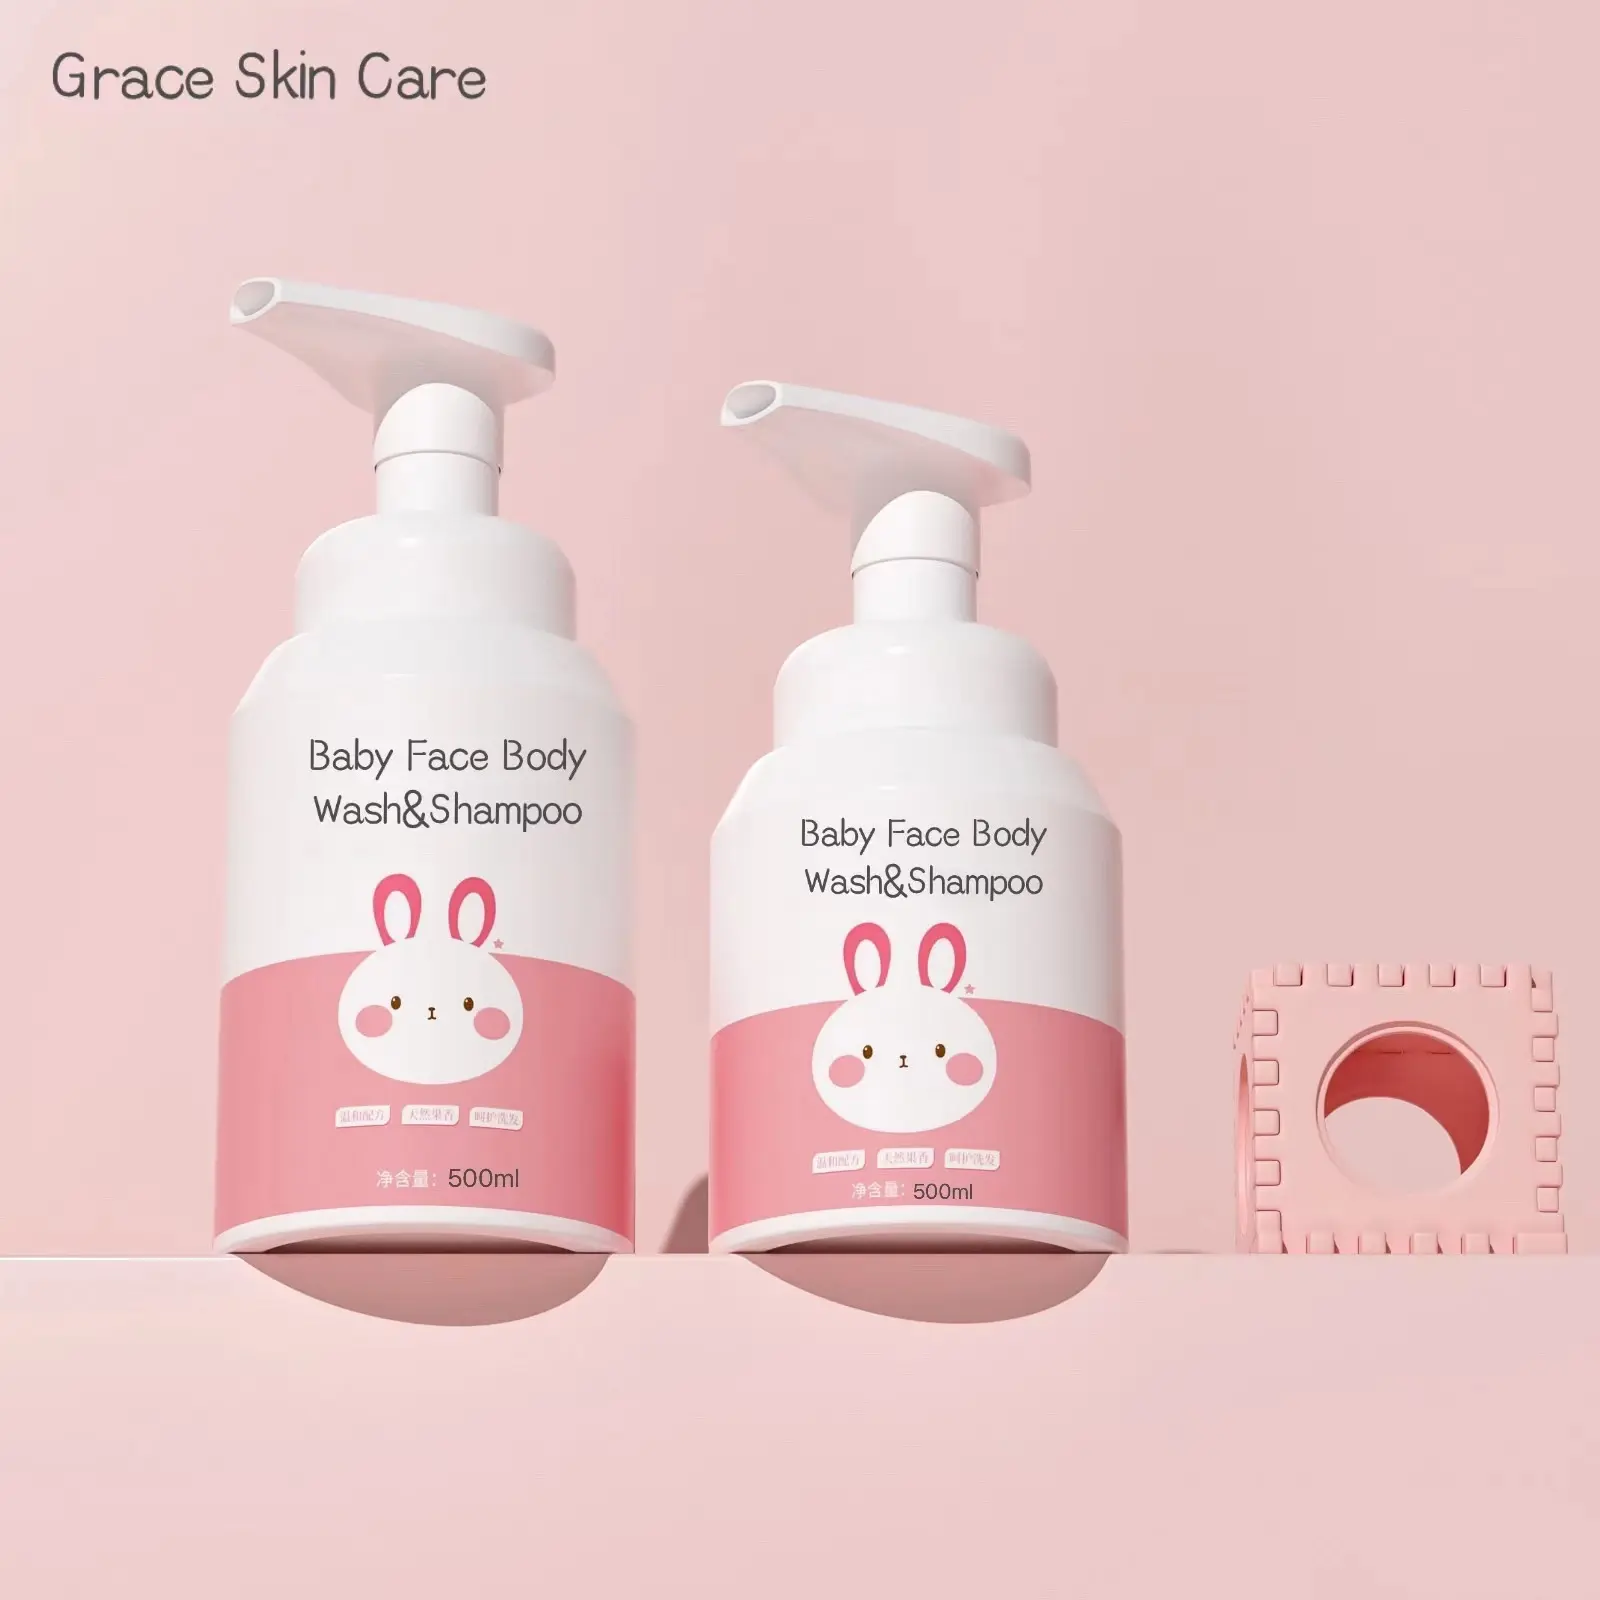 Baby Care 100% Natural Organic Baby Skincare Products Face Body Wash Shampoo Lotion Face Cream Massage Oil Baby Skin Care Set